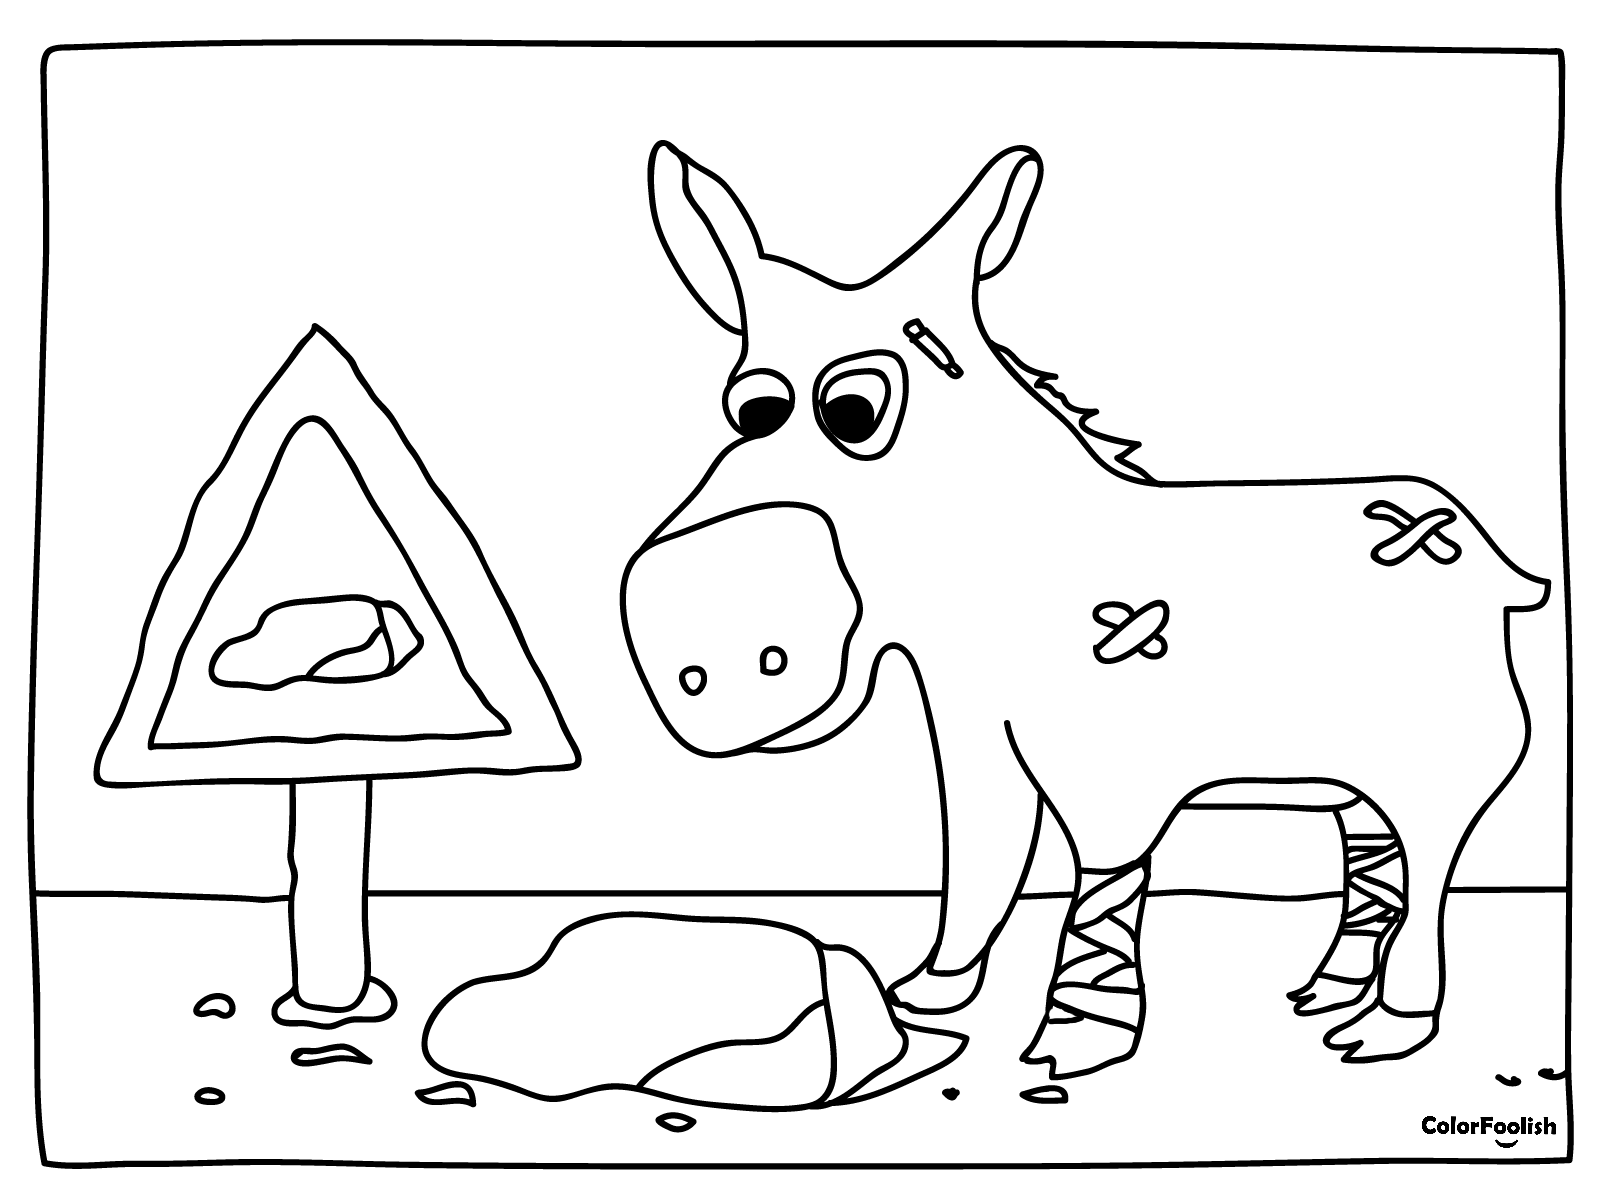 Coloring page of a donkey which will not trip over that rock